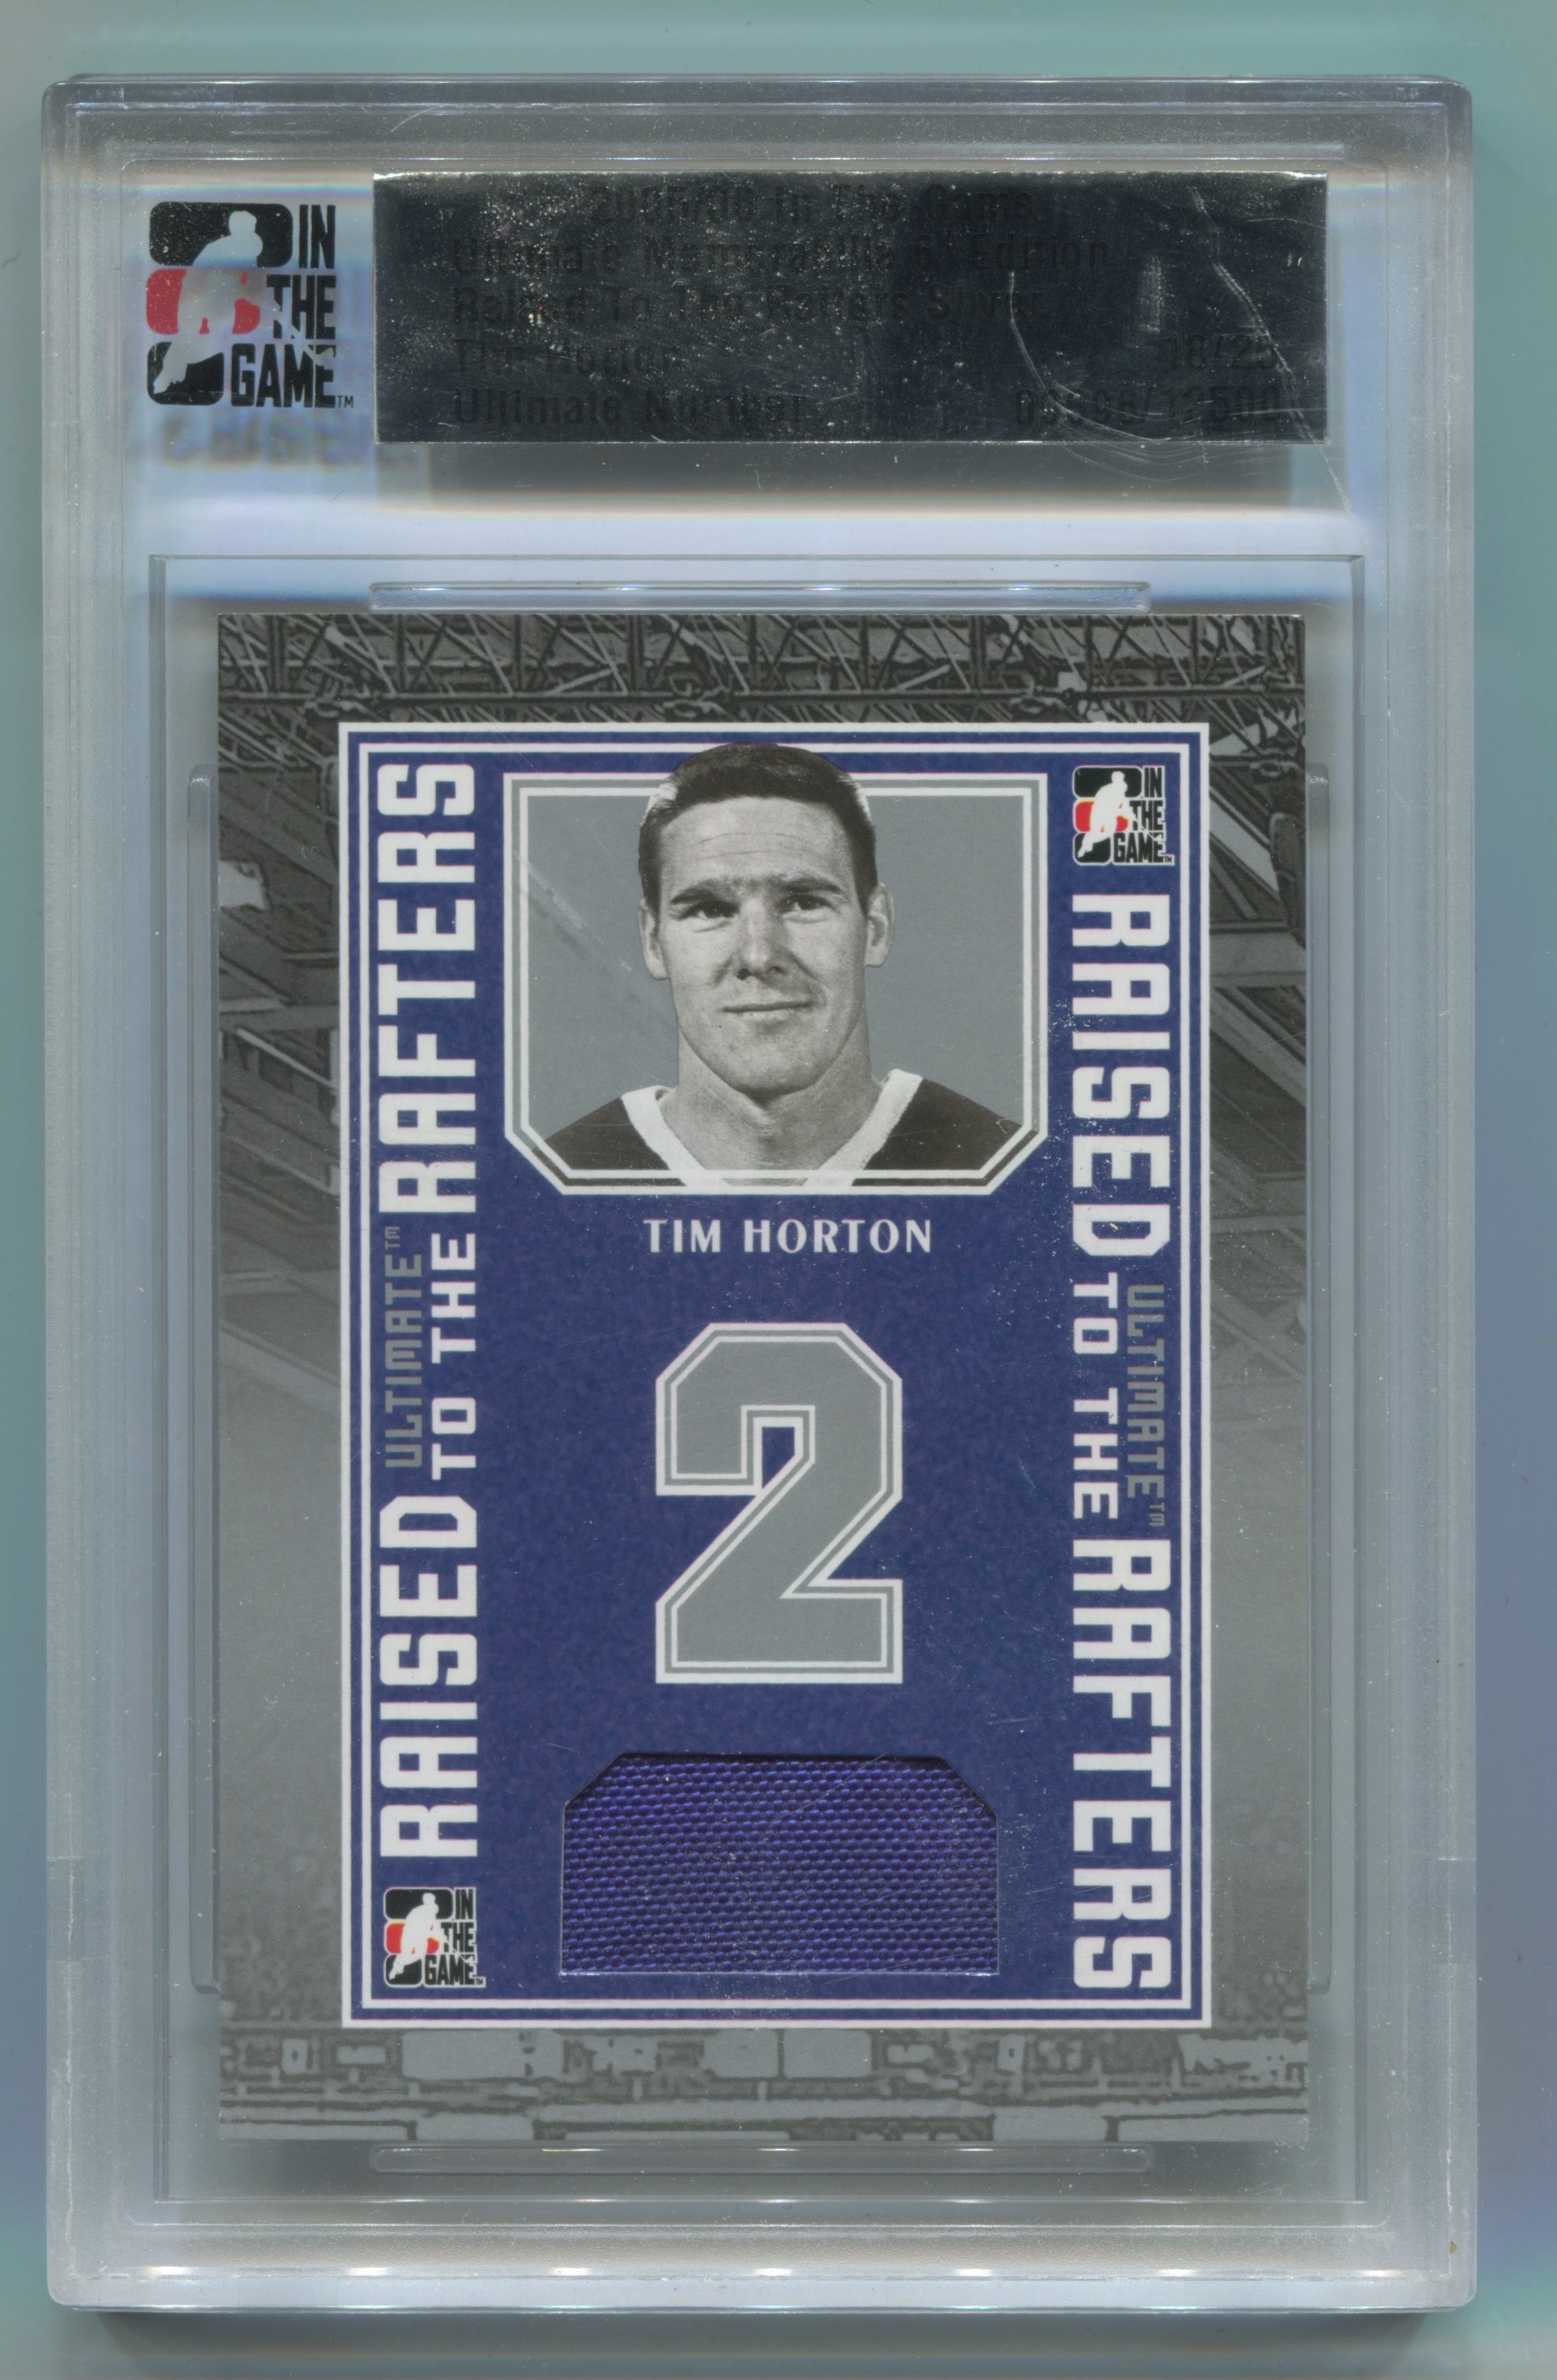 2005-06 ITG Ultimate Memorabilia Raised to the Rafters Silver Tim Horton #18/25 | Eastridge Sports Cards